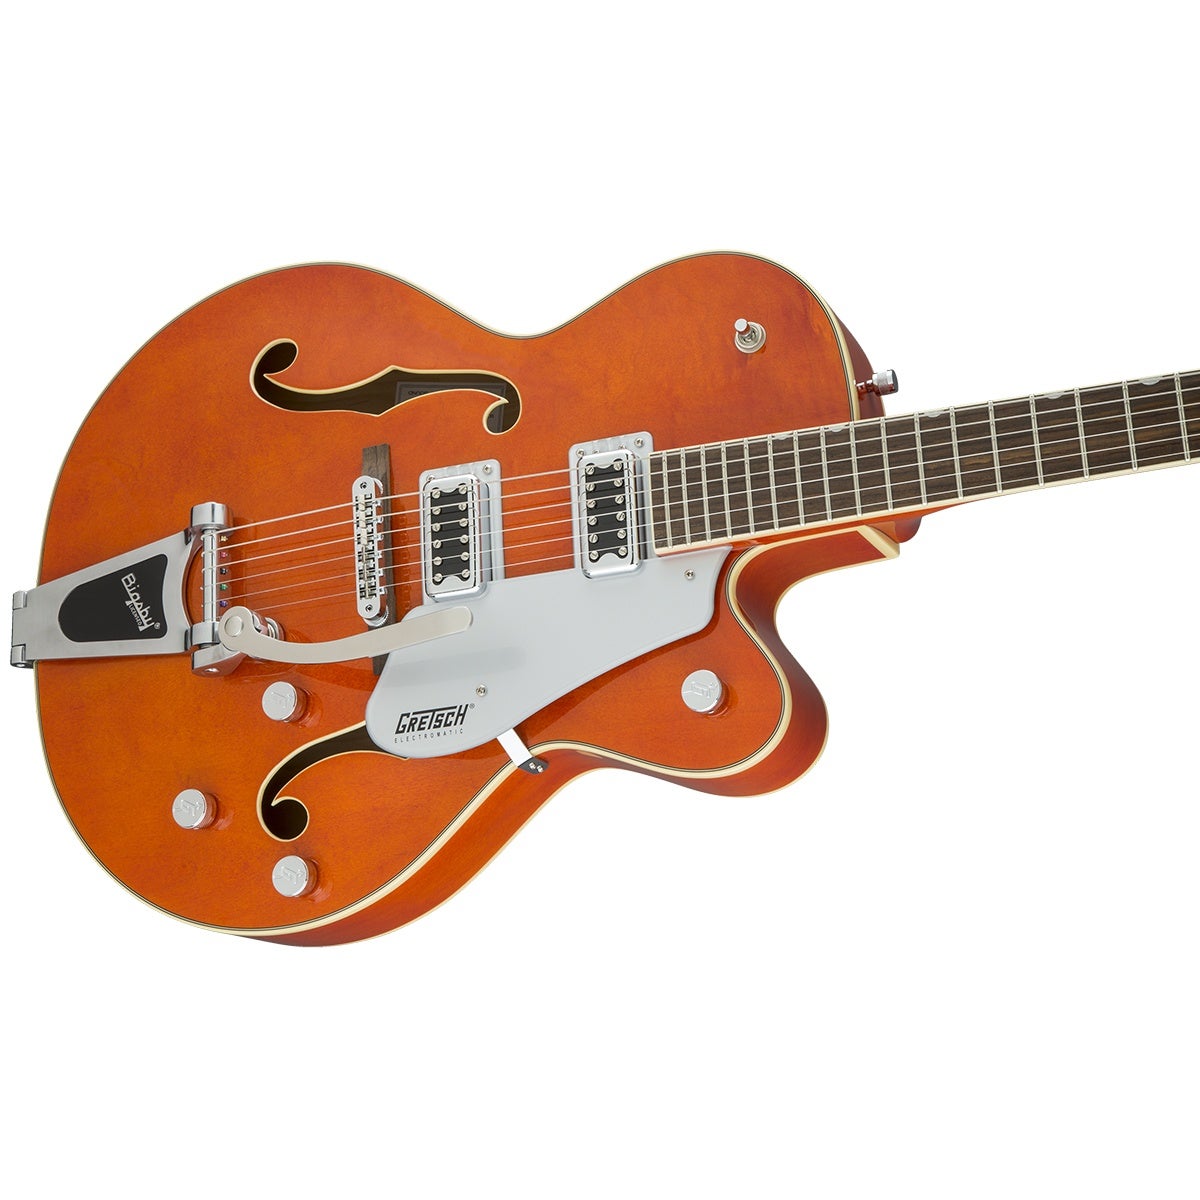 Electromatic　G5420T　(Orange　Guitar　Body　Stain)　Single-Cut　with　Electric　Bigsby　Gretsch　Hollow